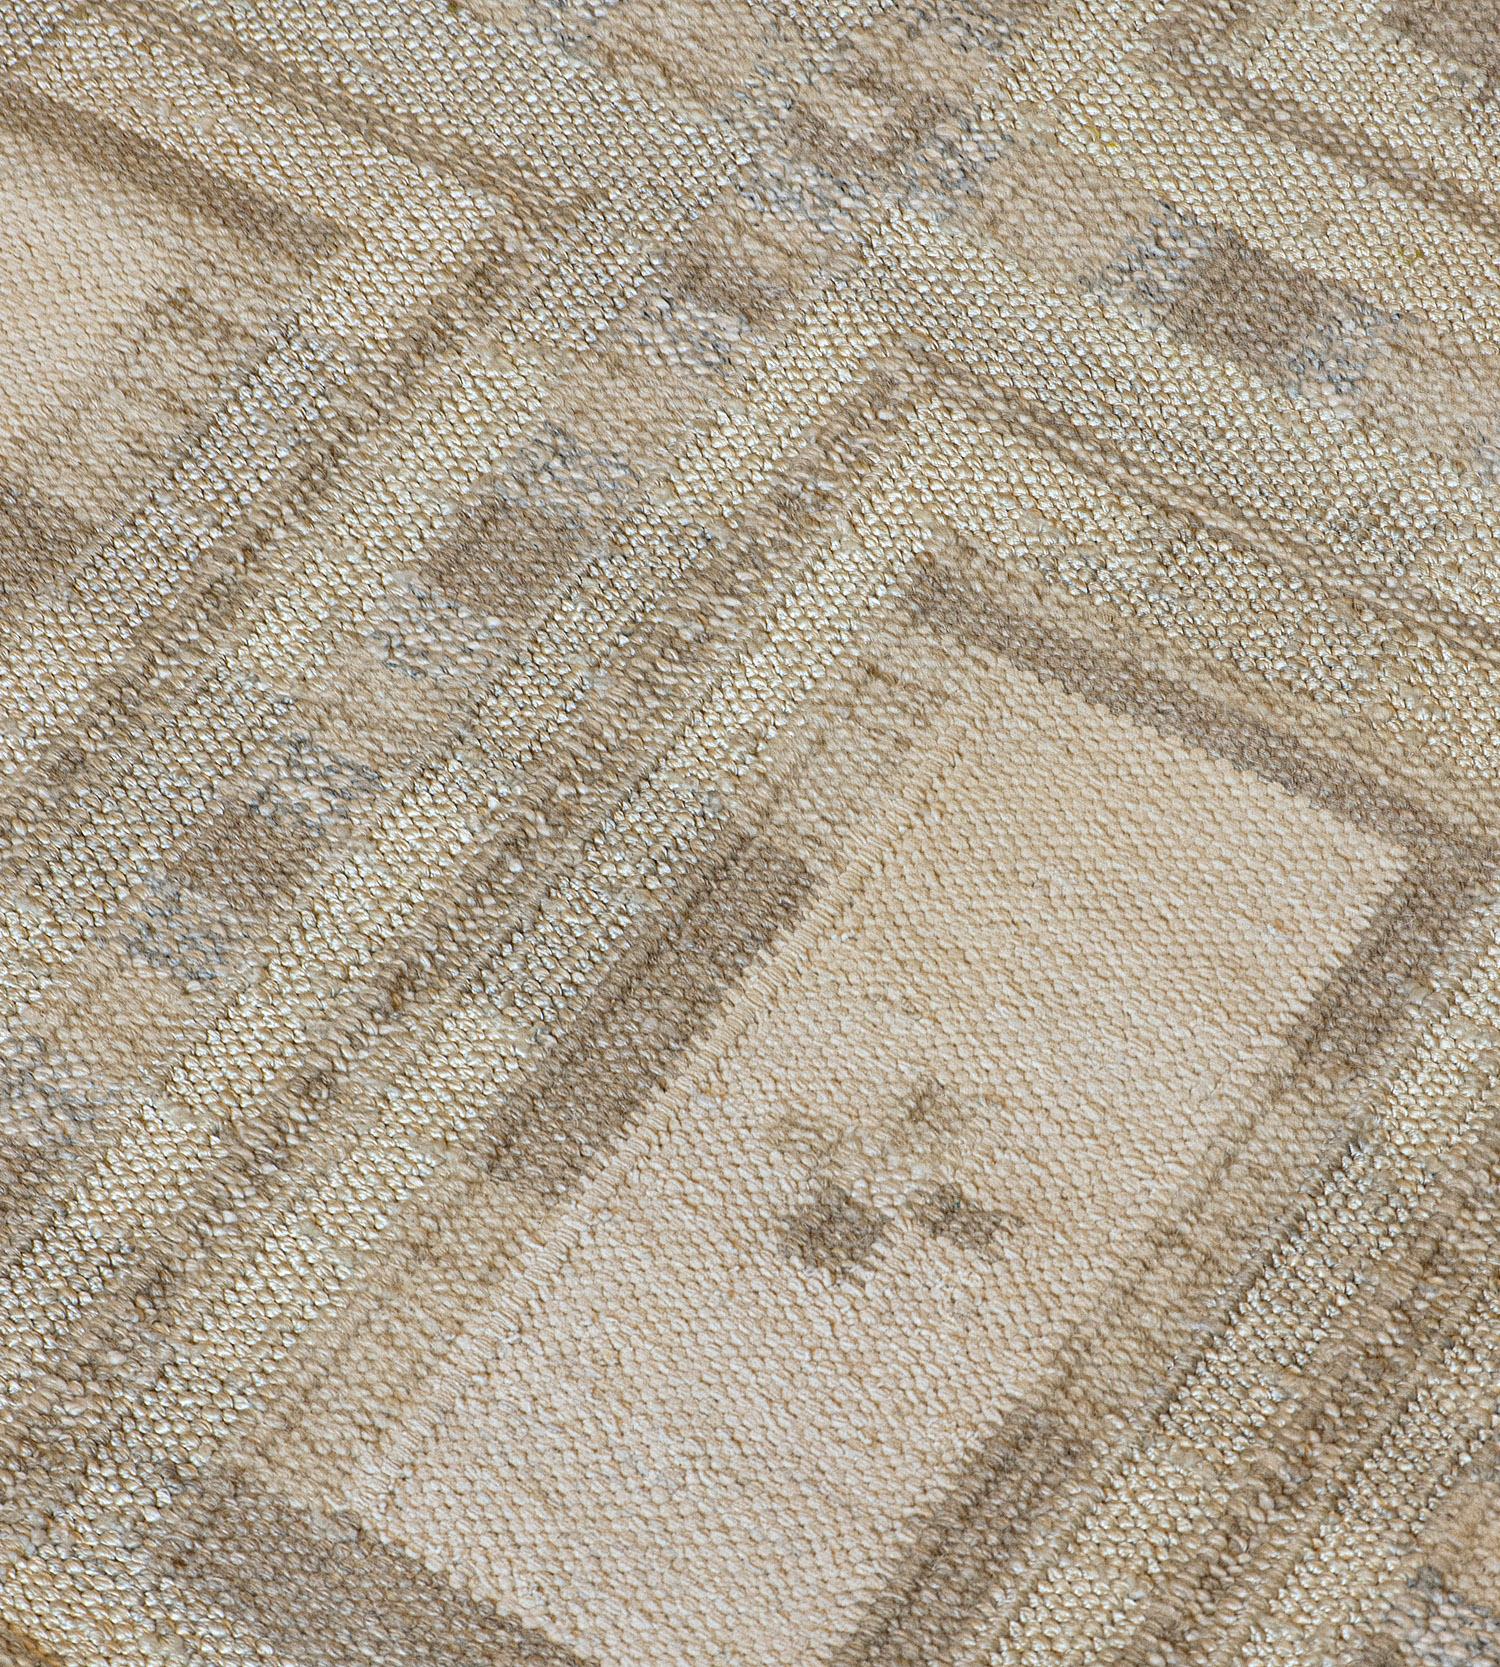 The Mansour Modern Swedish collection is primarily inspired by vintage Swedish flat-weave rugs whose geometric designs are relevant as ever in the 21st century. The handwoven collection utilizes a number of flat-weave techniques, yielding various